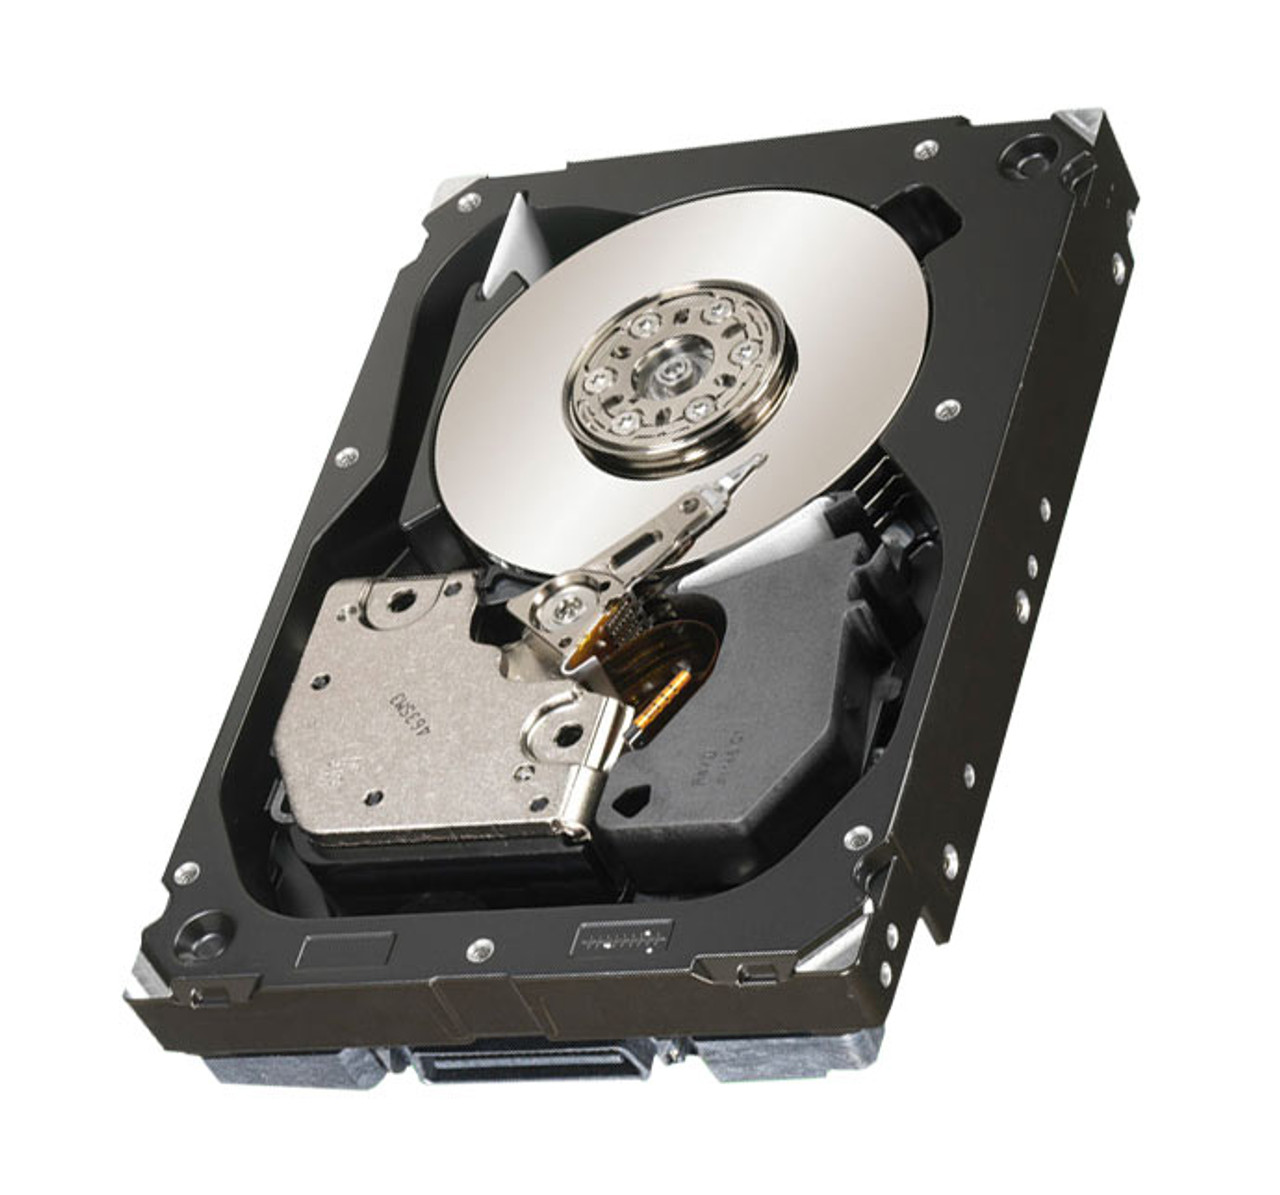 06P5115 IBM 18.2GB 15000RPM Fibre Channel 2Gbps Hot Swap 3.5-inch Internal Hard Drive with Tray